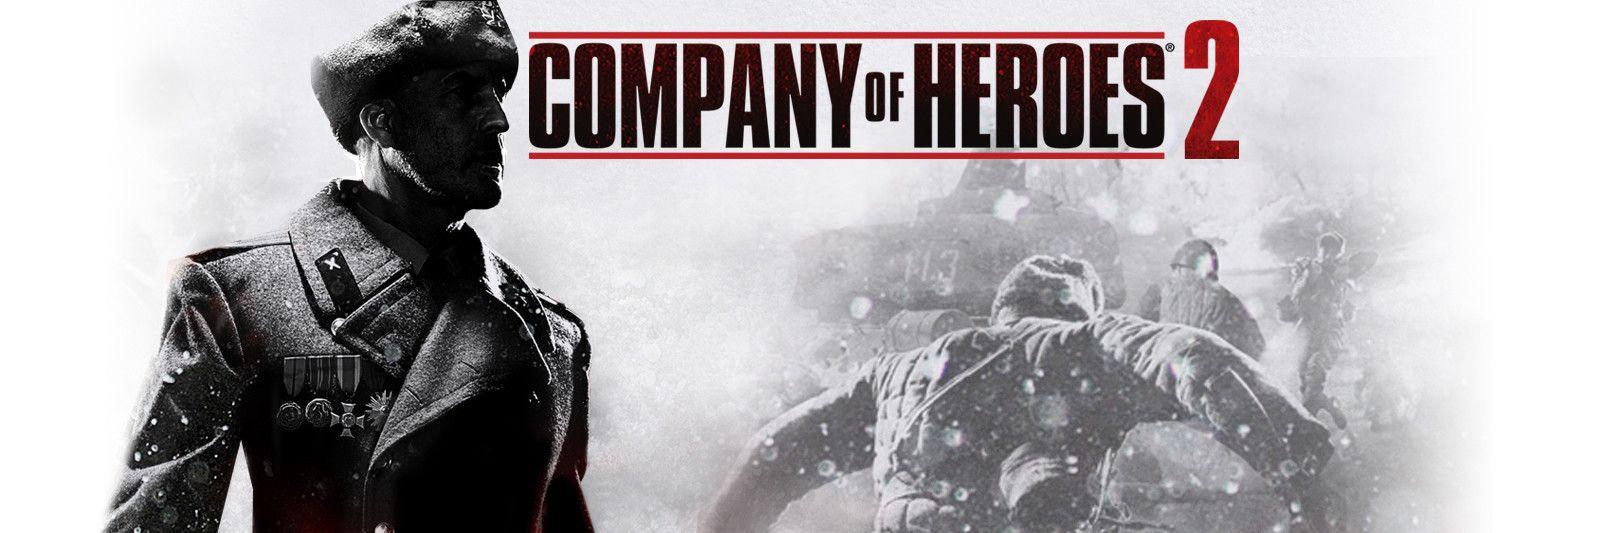 Company of Heroes 2 wallpapers 12